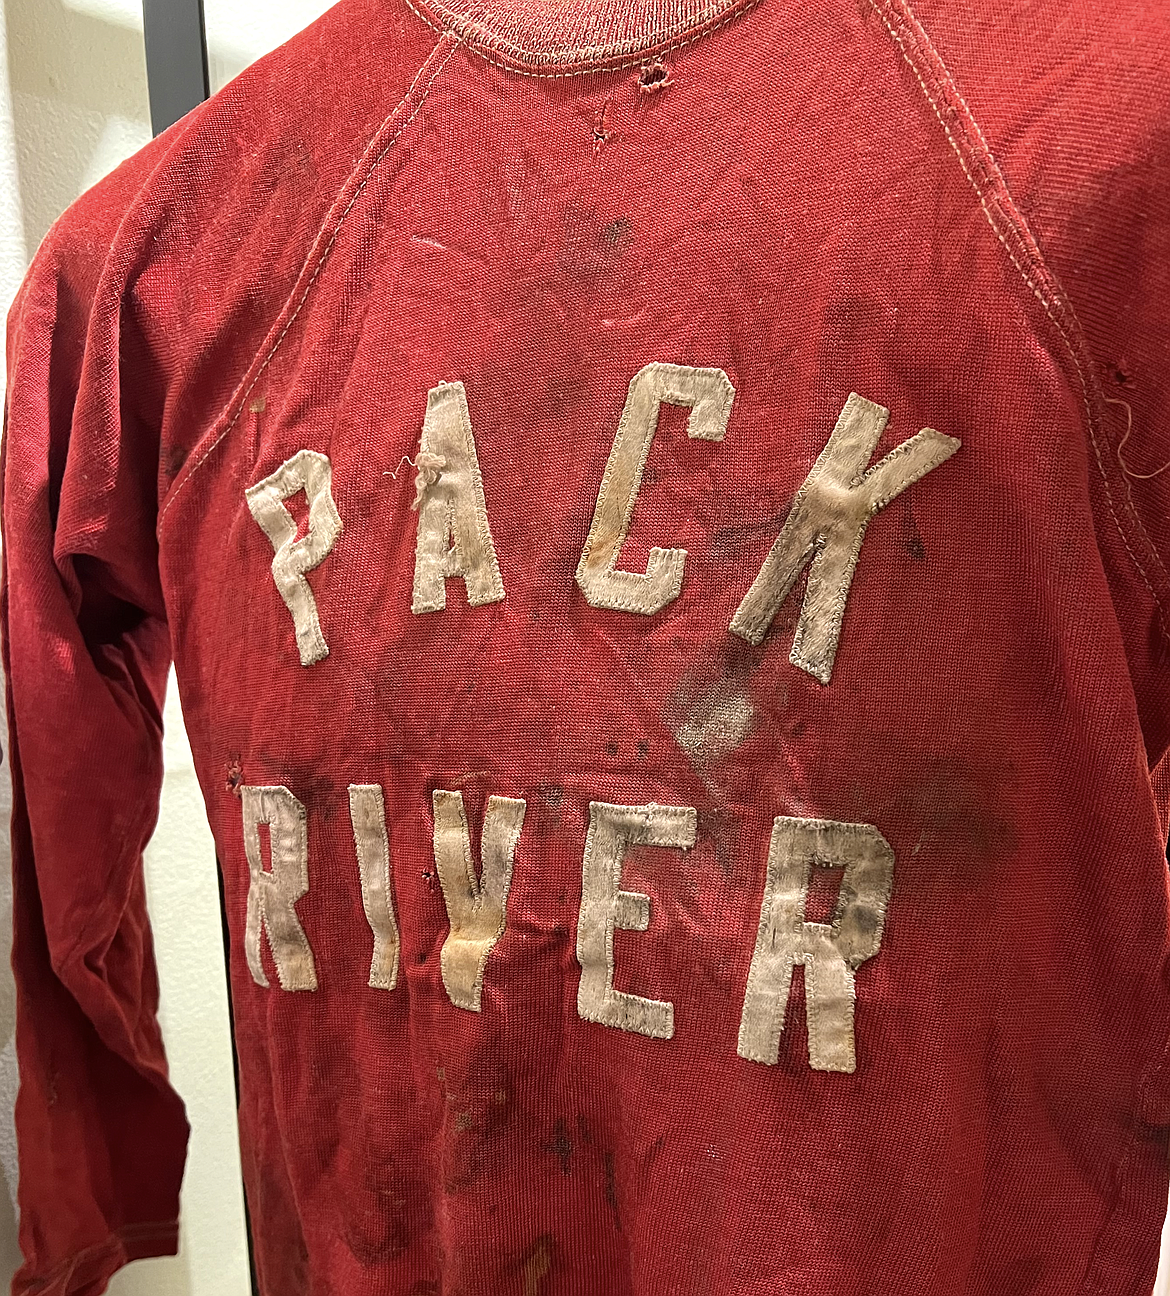 A Pack River baseball jersey found in the corner of the Planer Mill by Marvin Roberts when he worked there in the mid-1930s. Roberts doanted the item to the Bonner County History Museum.